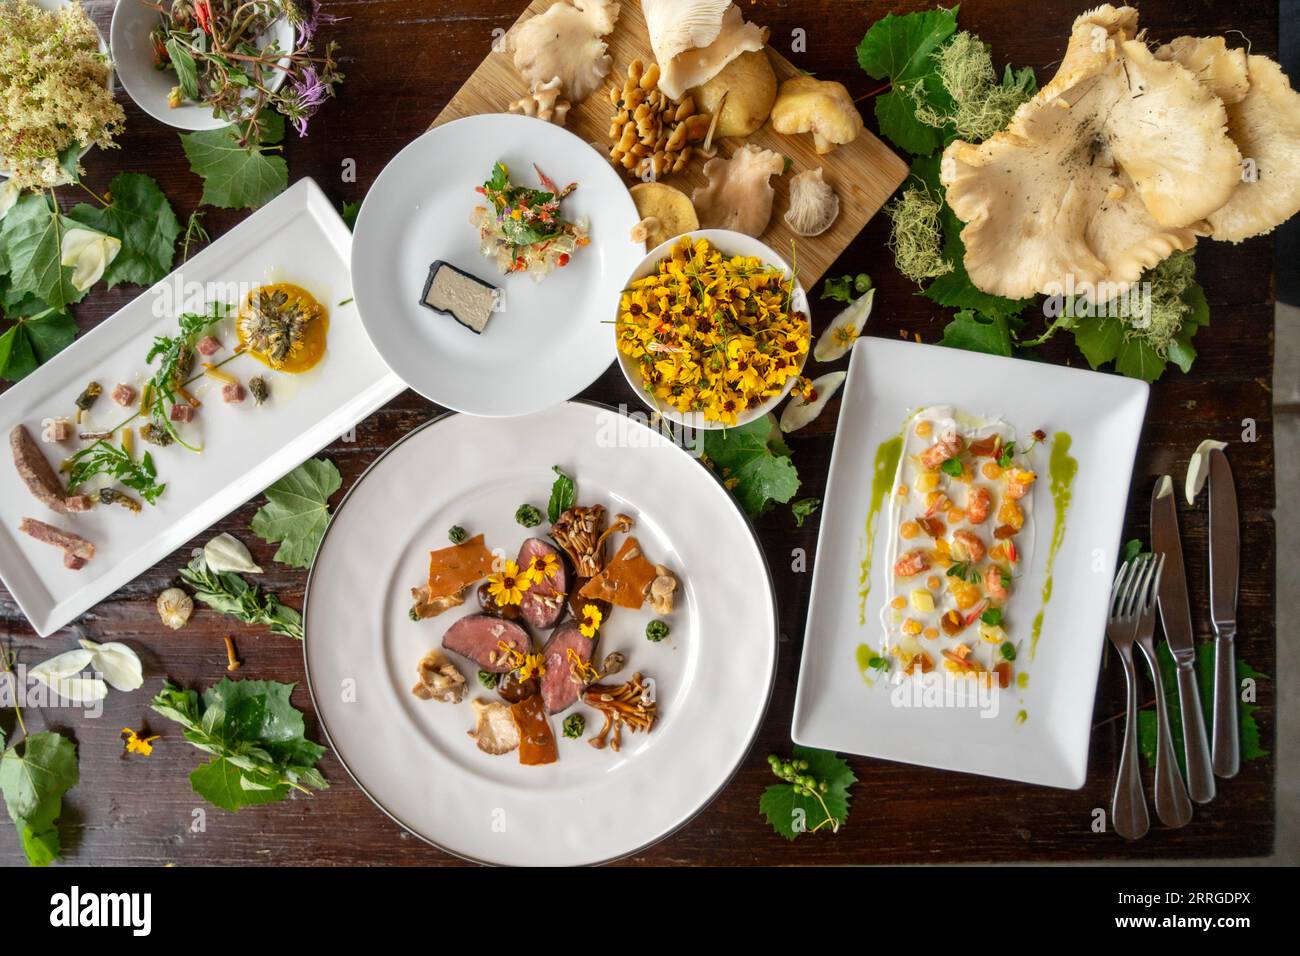 Overhead view of foraged ingredients and a plated dish on table Stock Photo